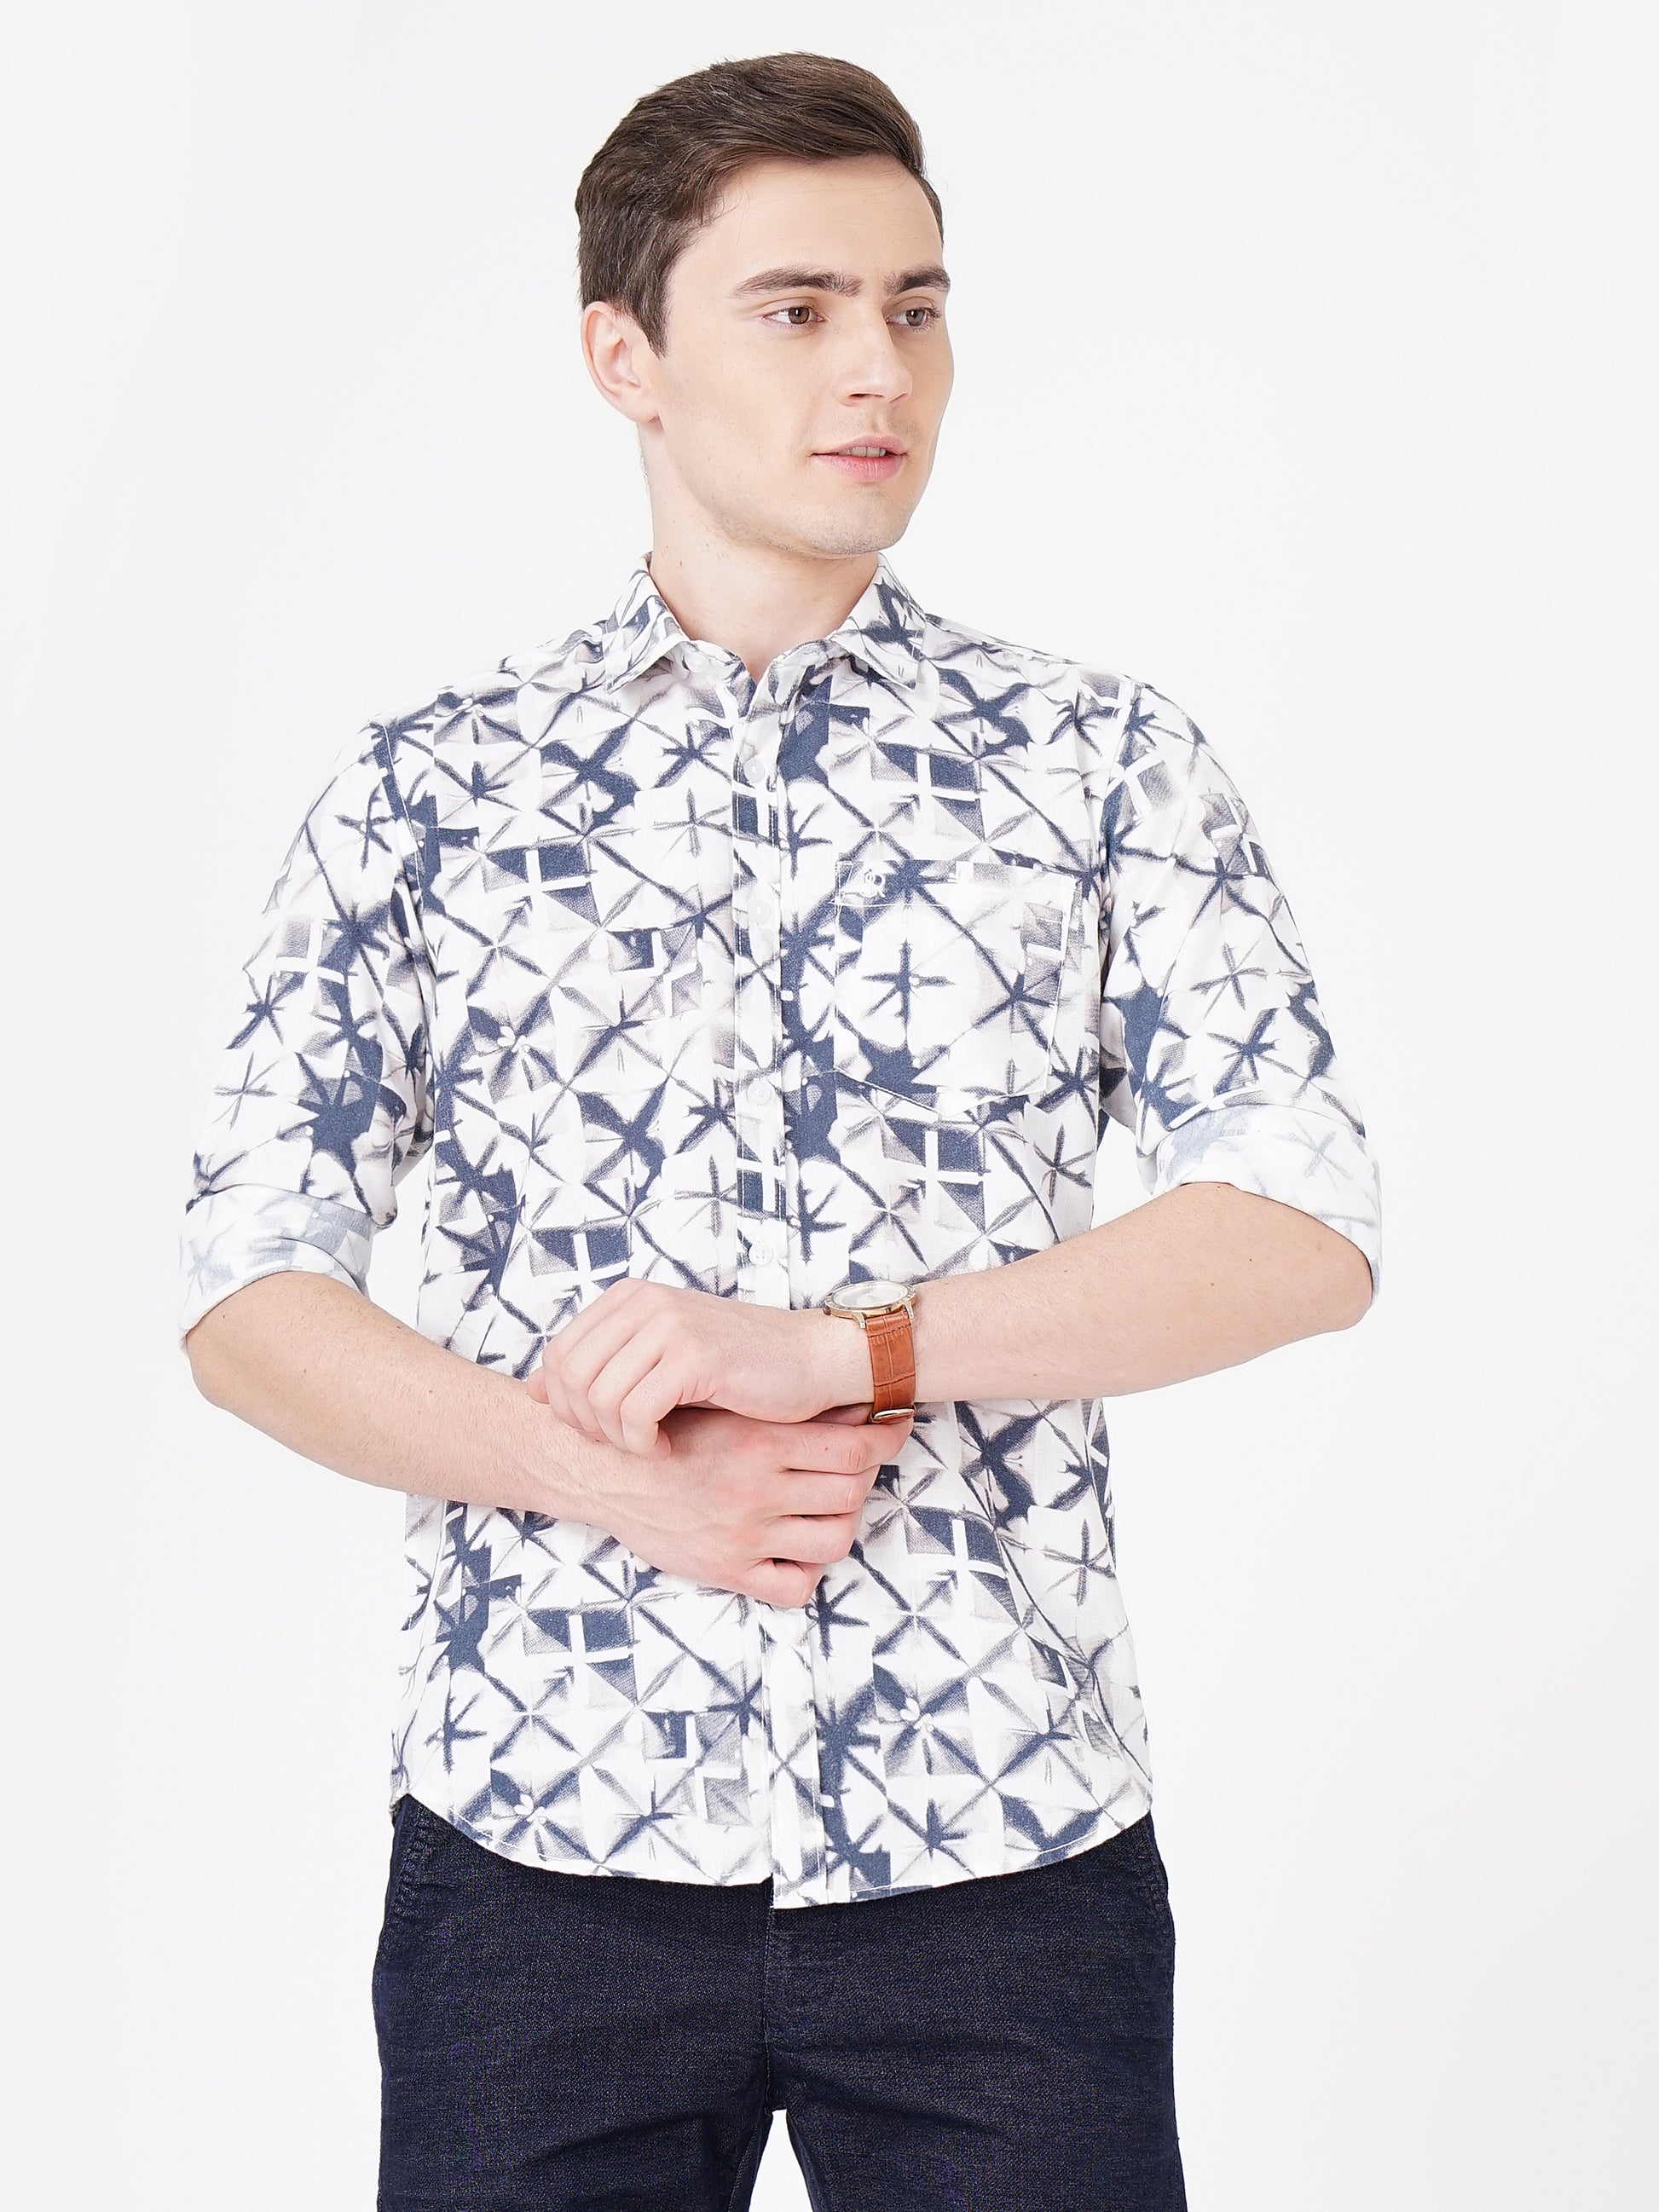 Teal Blue All Over Criss Cross Printed Shirt for Men 